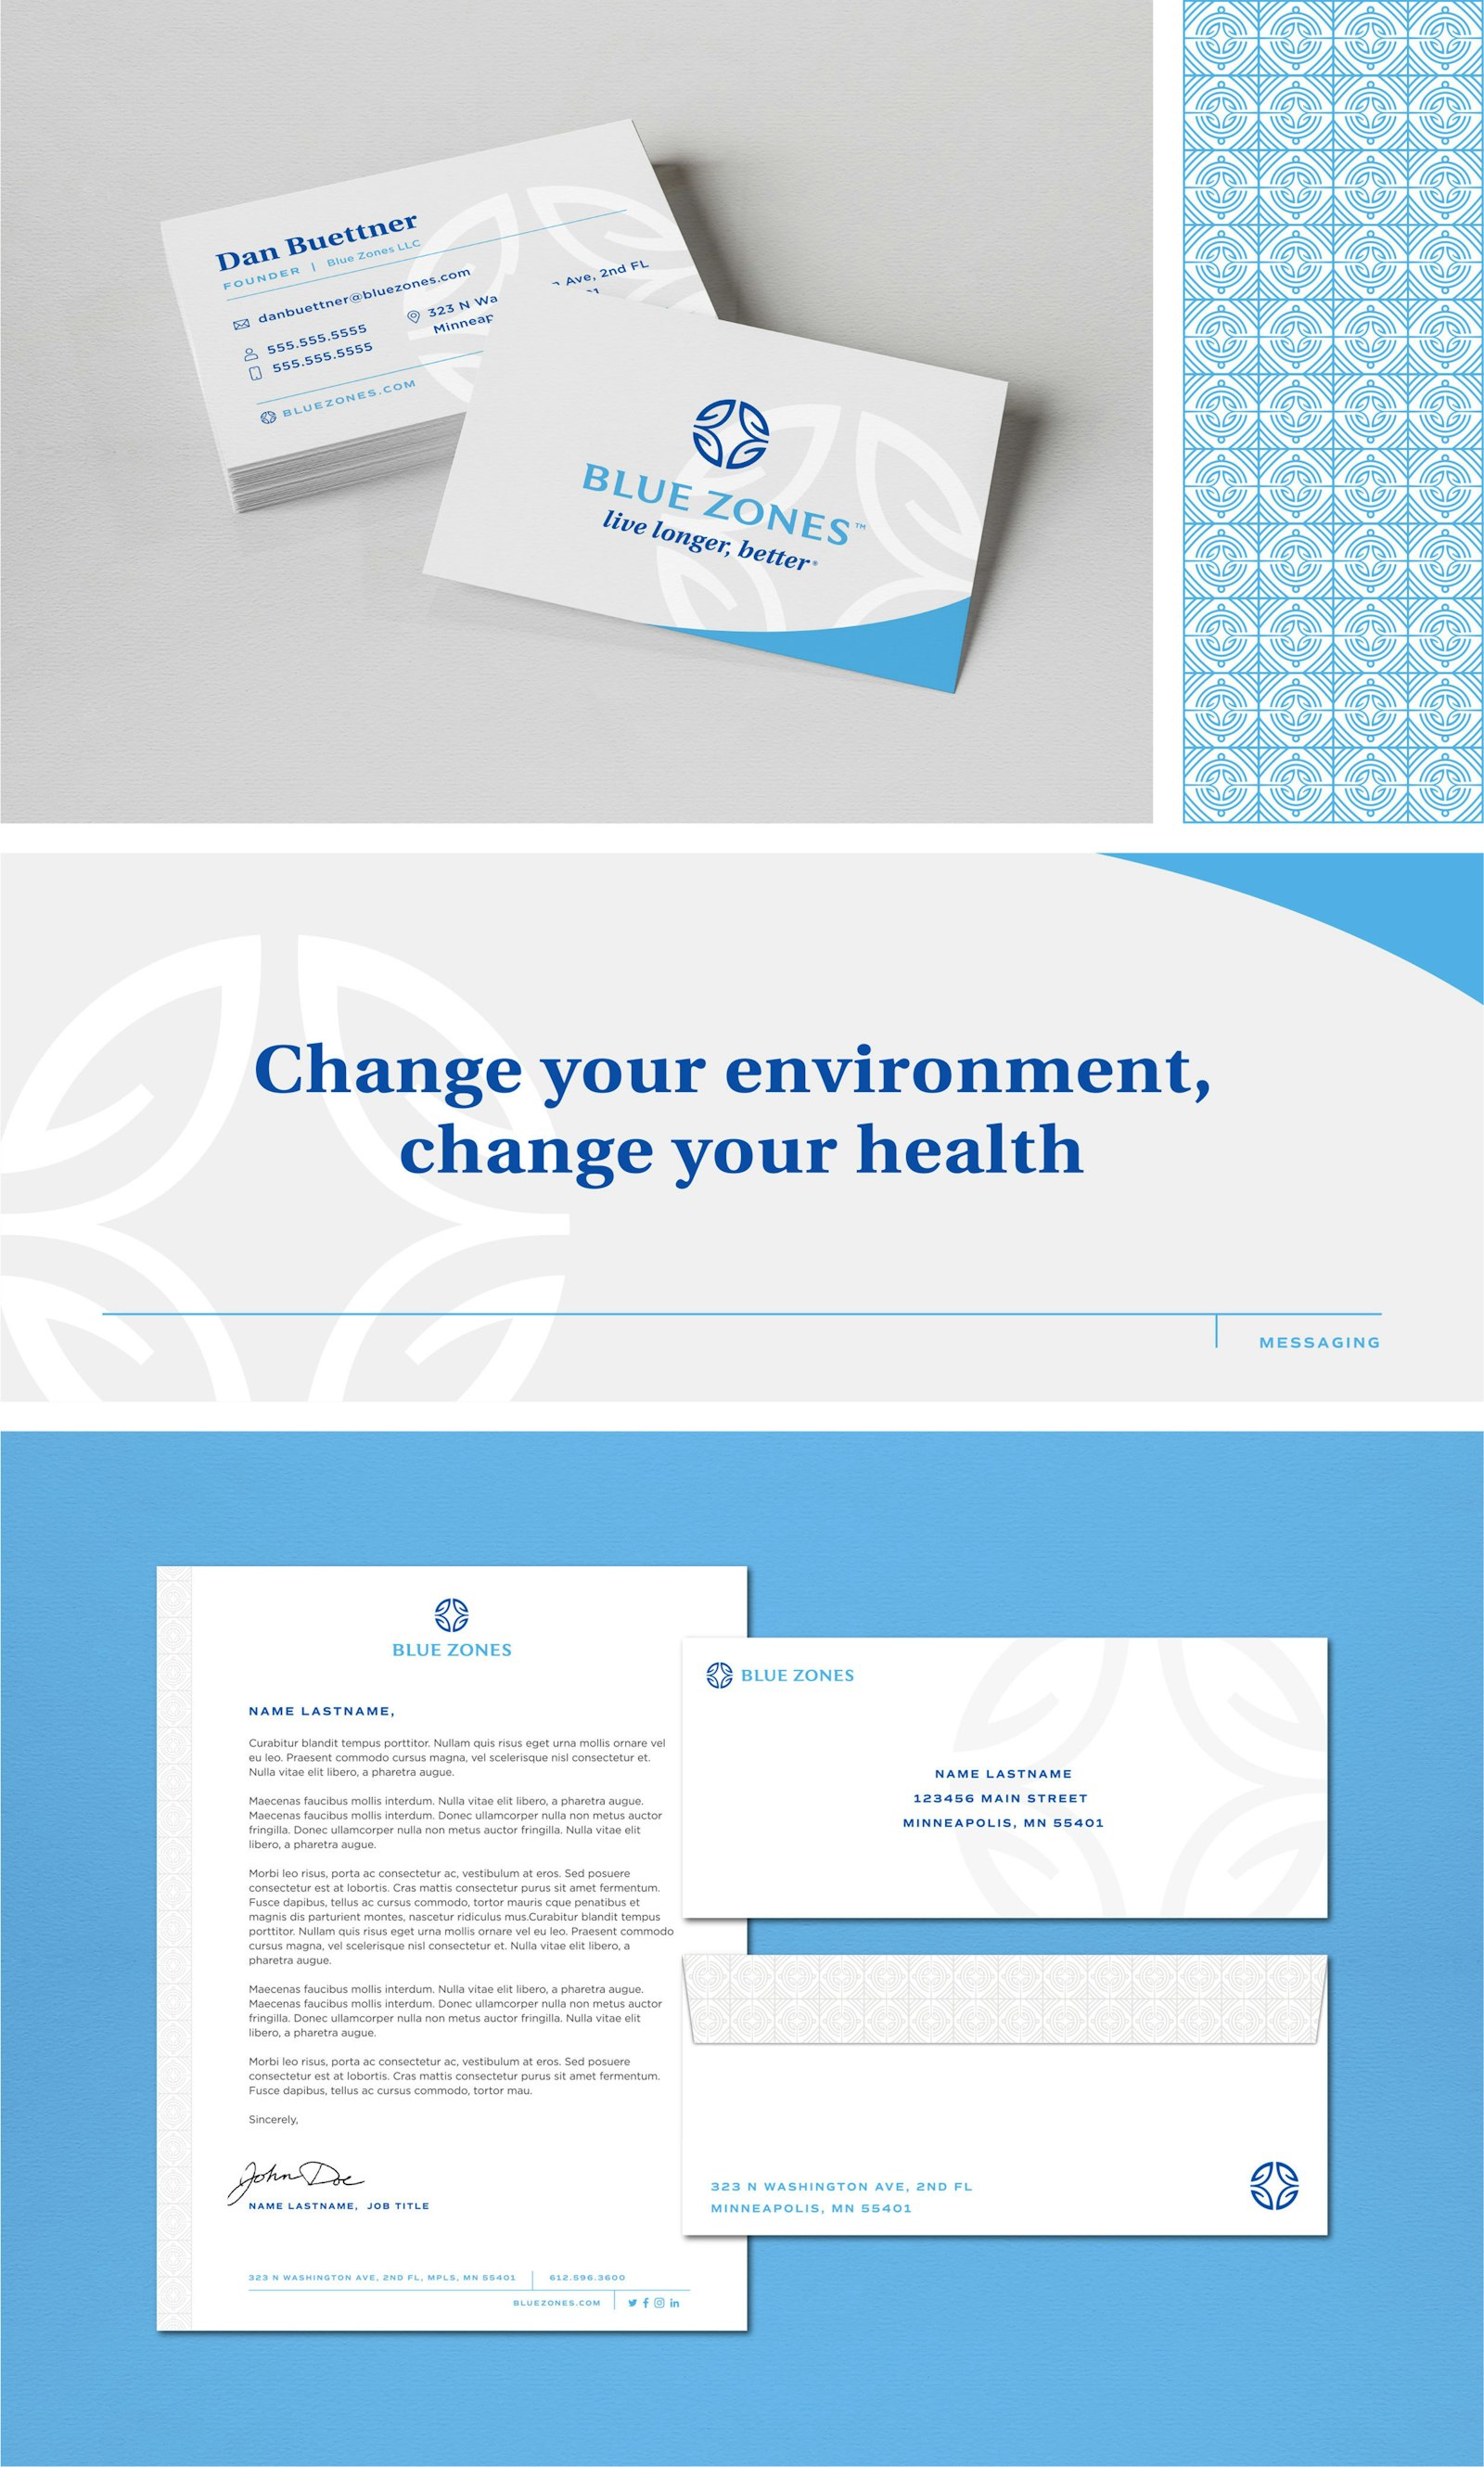 The Blue Zones by Dan Buettner brand logo mark design business cards and letterhead.